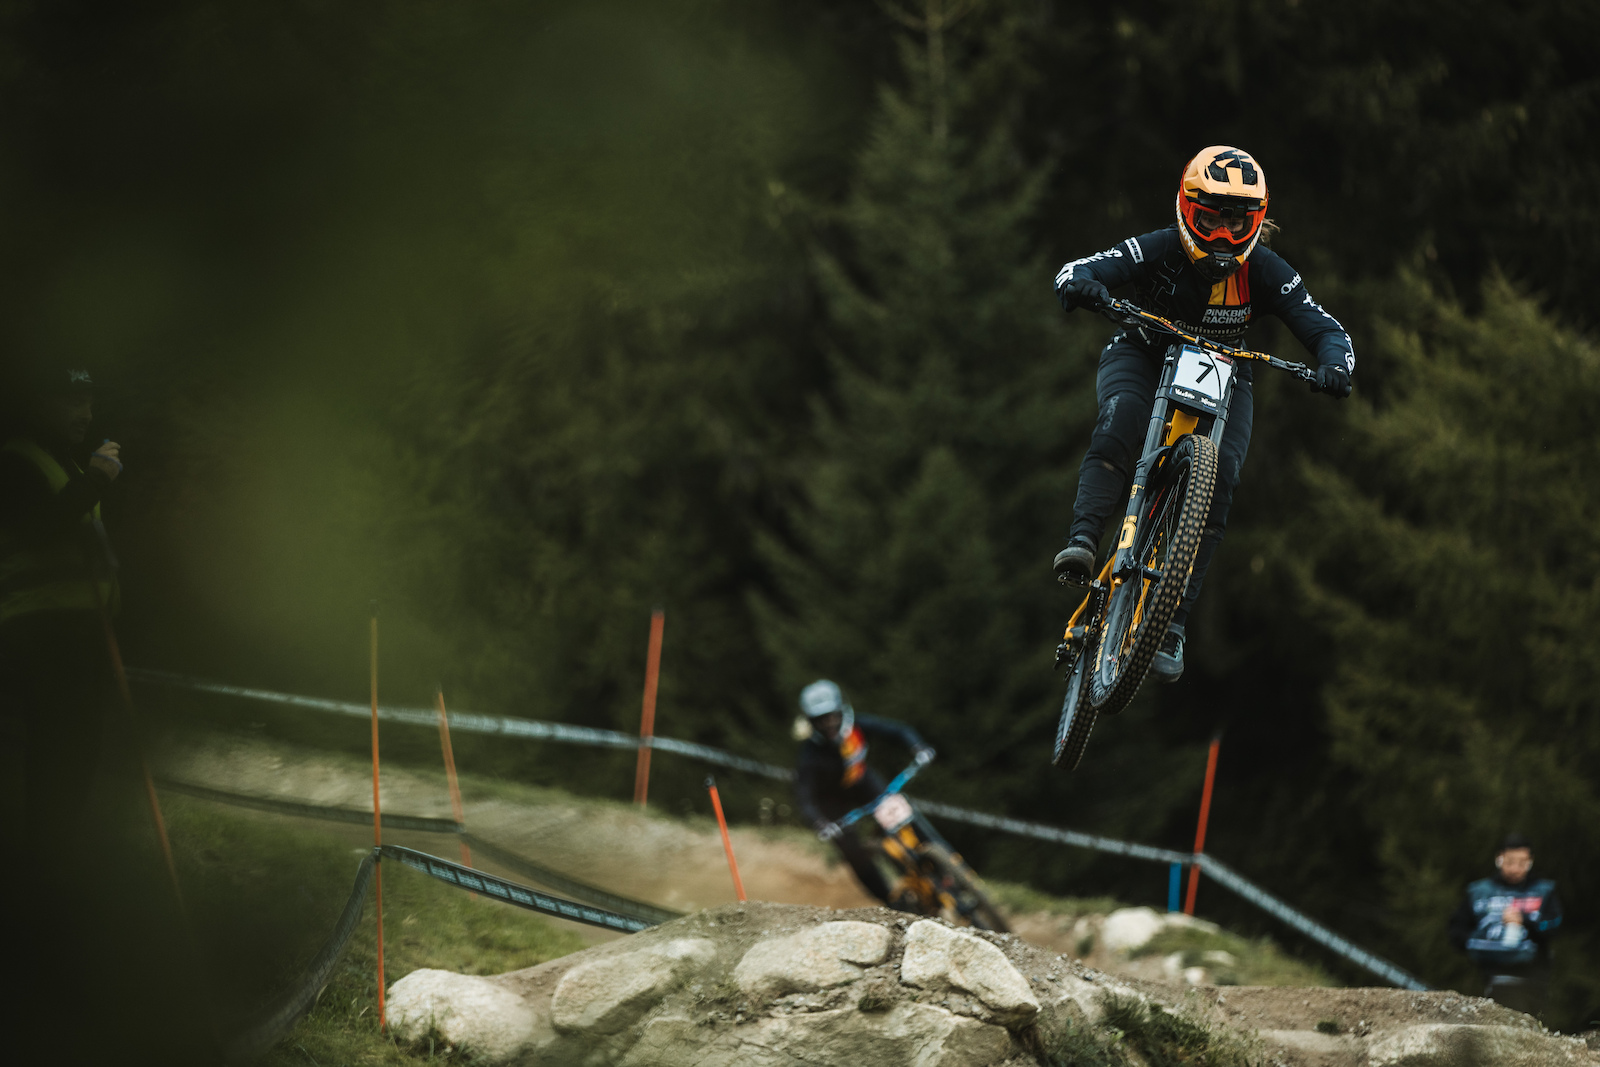 Young Rider Passes Away After Accident at BC Cup DH Race - Pinkbike